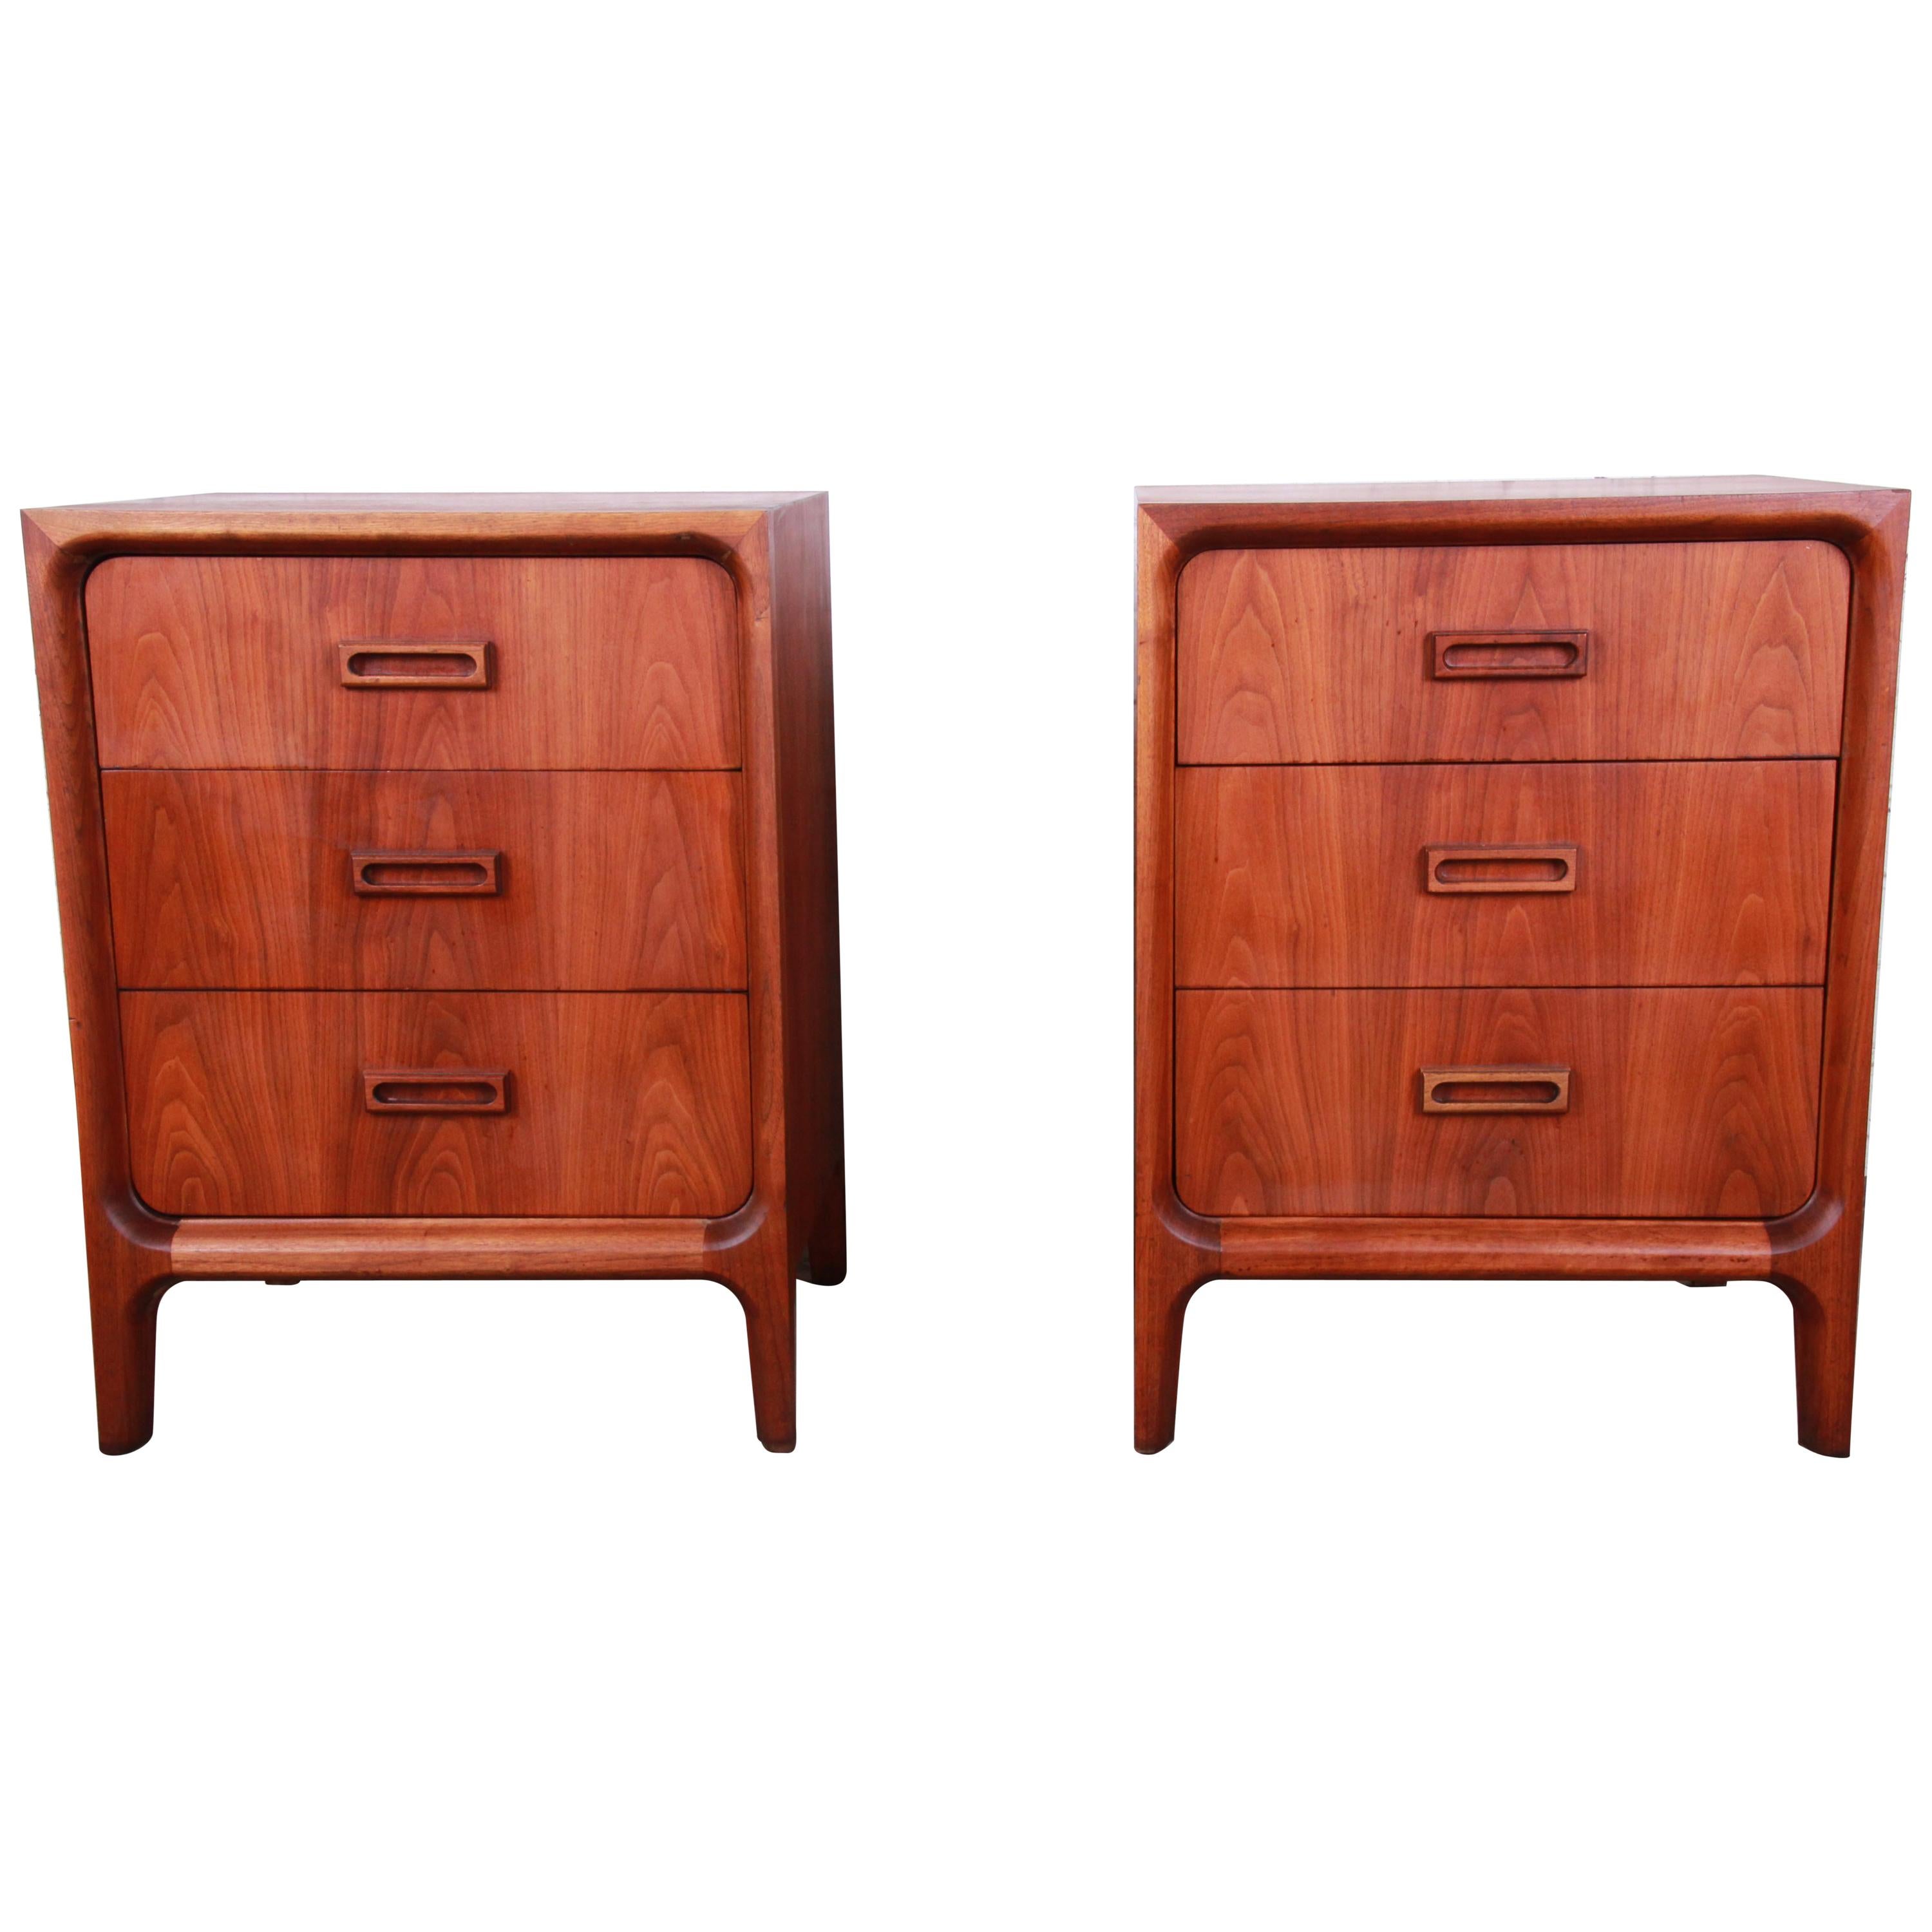 Widdicomb Mid-Century Modern Walnut Bachelor Chests or Large Nightstands